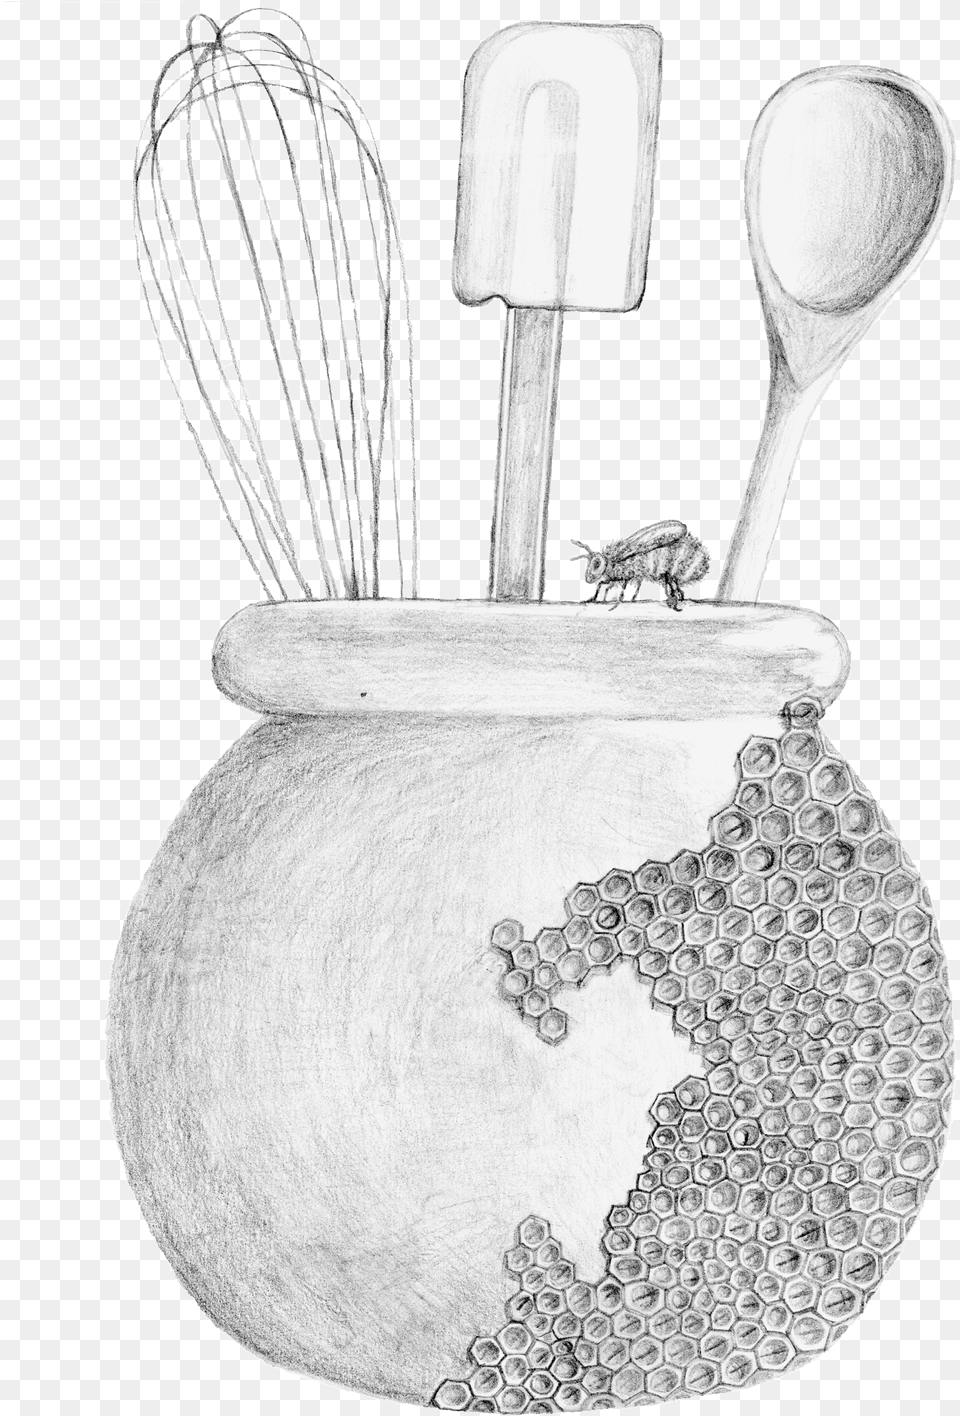 Collection Of Pot Drawing Still Life Download Illustration, Cutlery, Spoon, Animal, Dinosaur Png